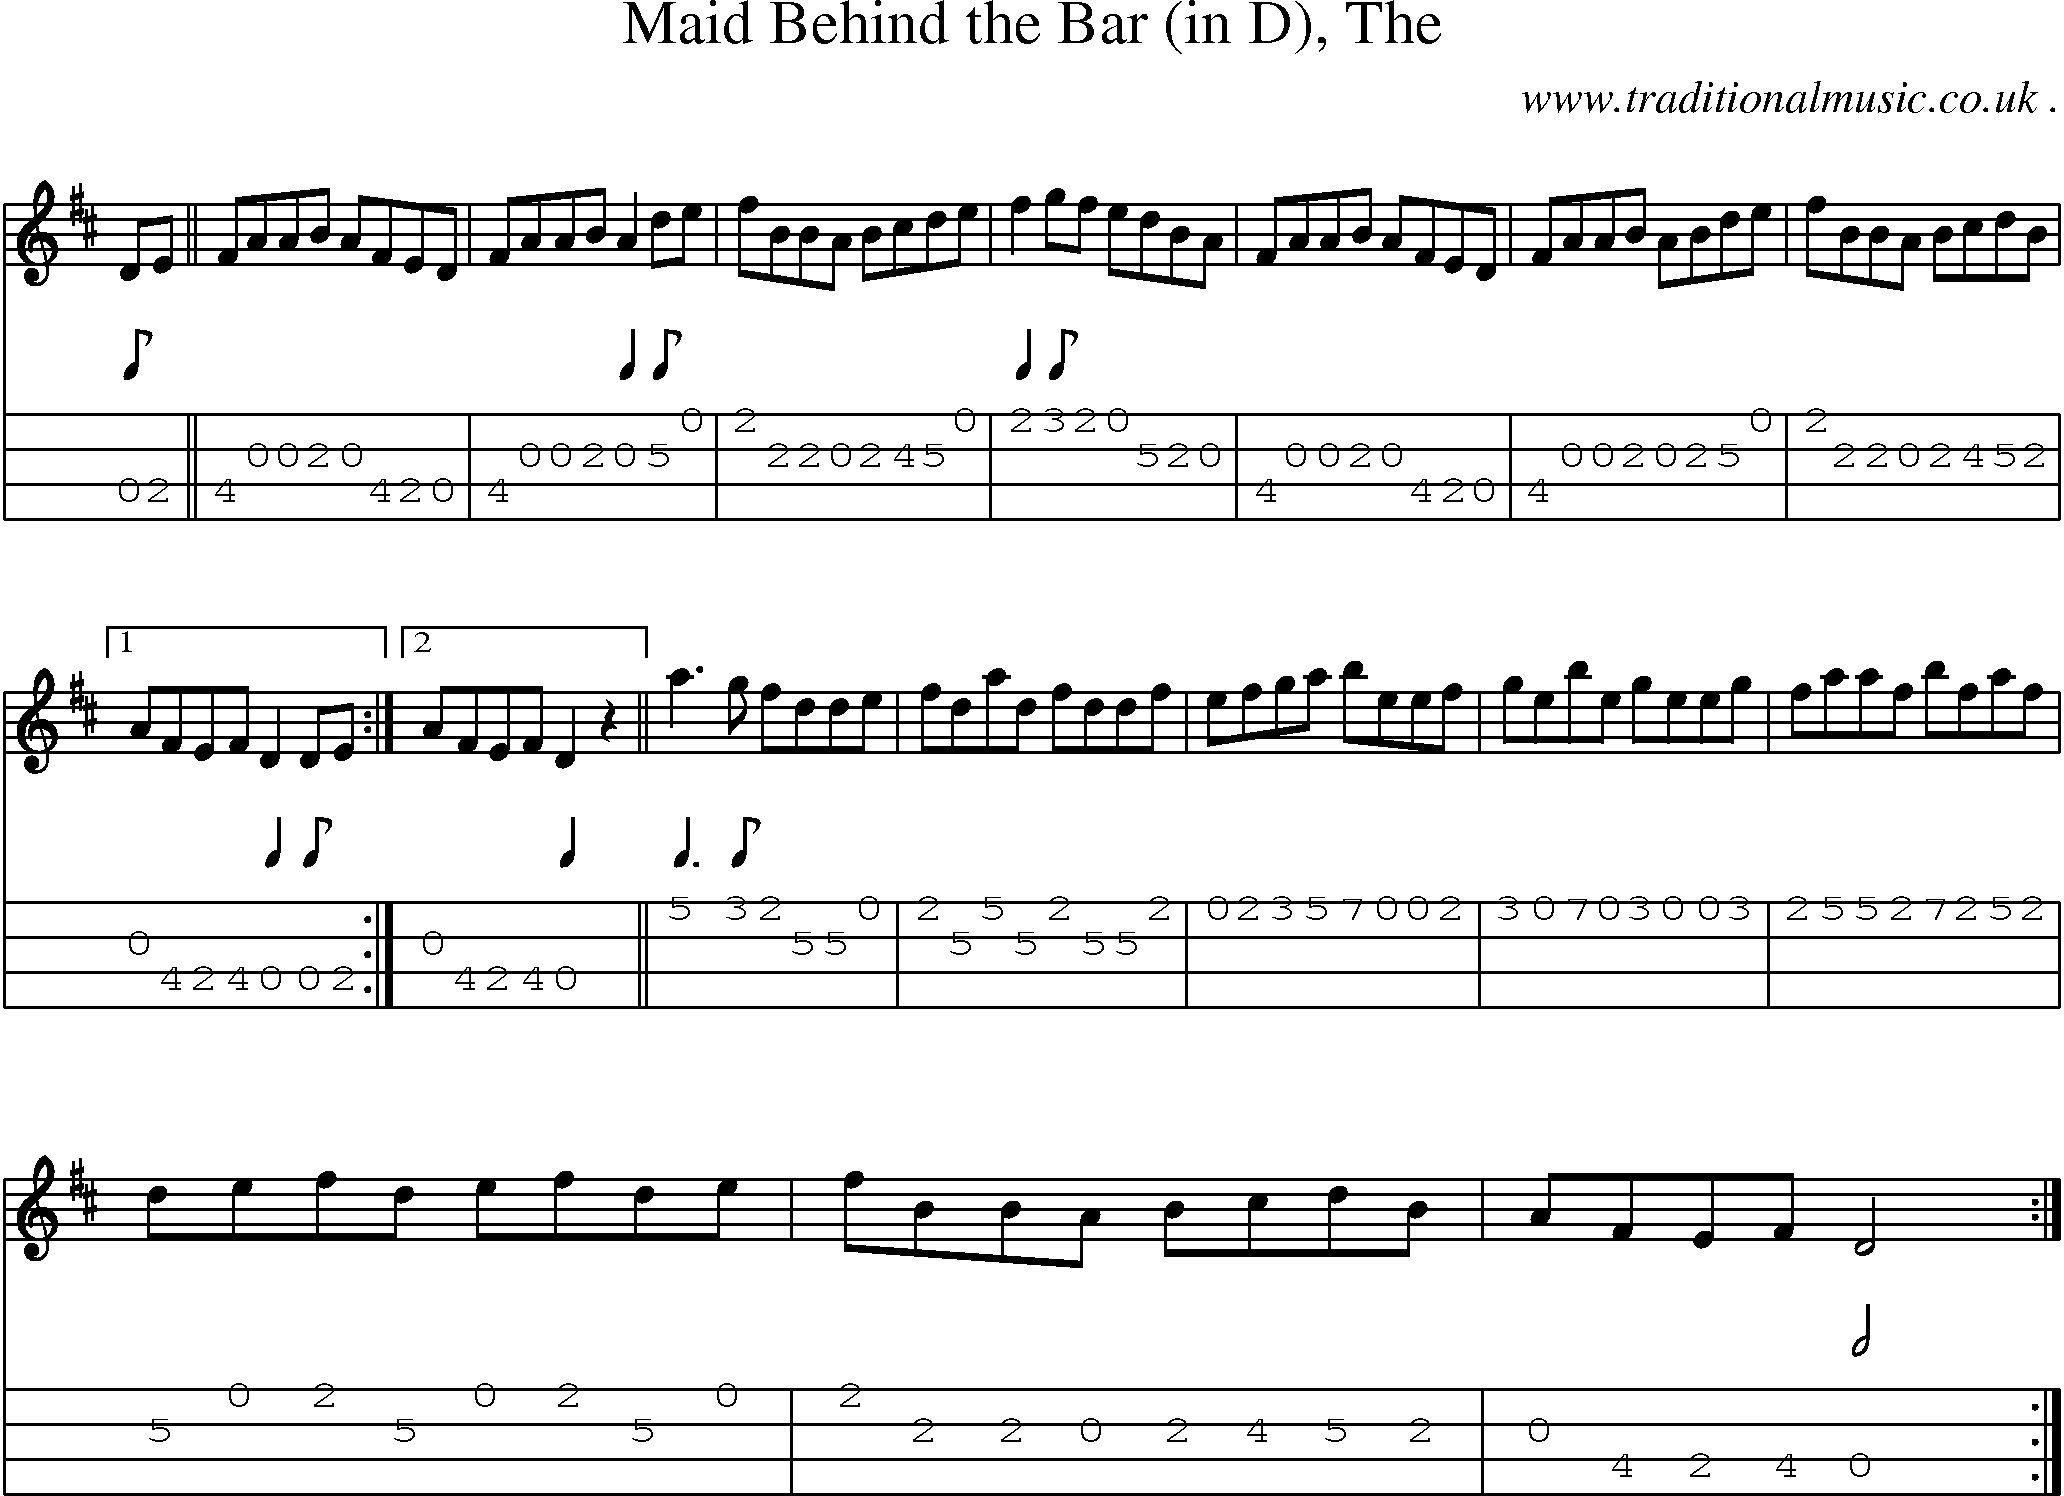 Sheet-music  score, Chords and Mandolin Tabs for Maid Behind The Bar In D The